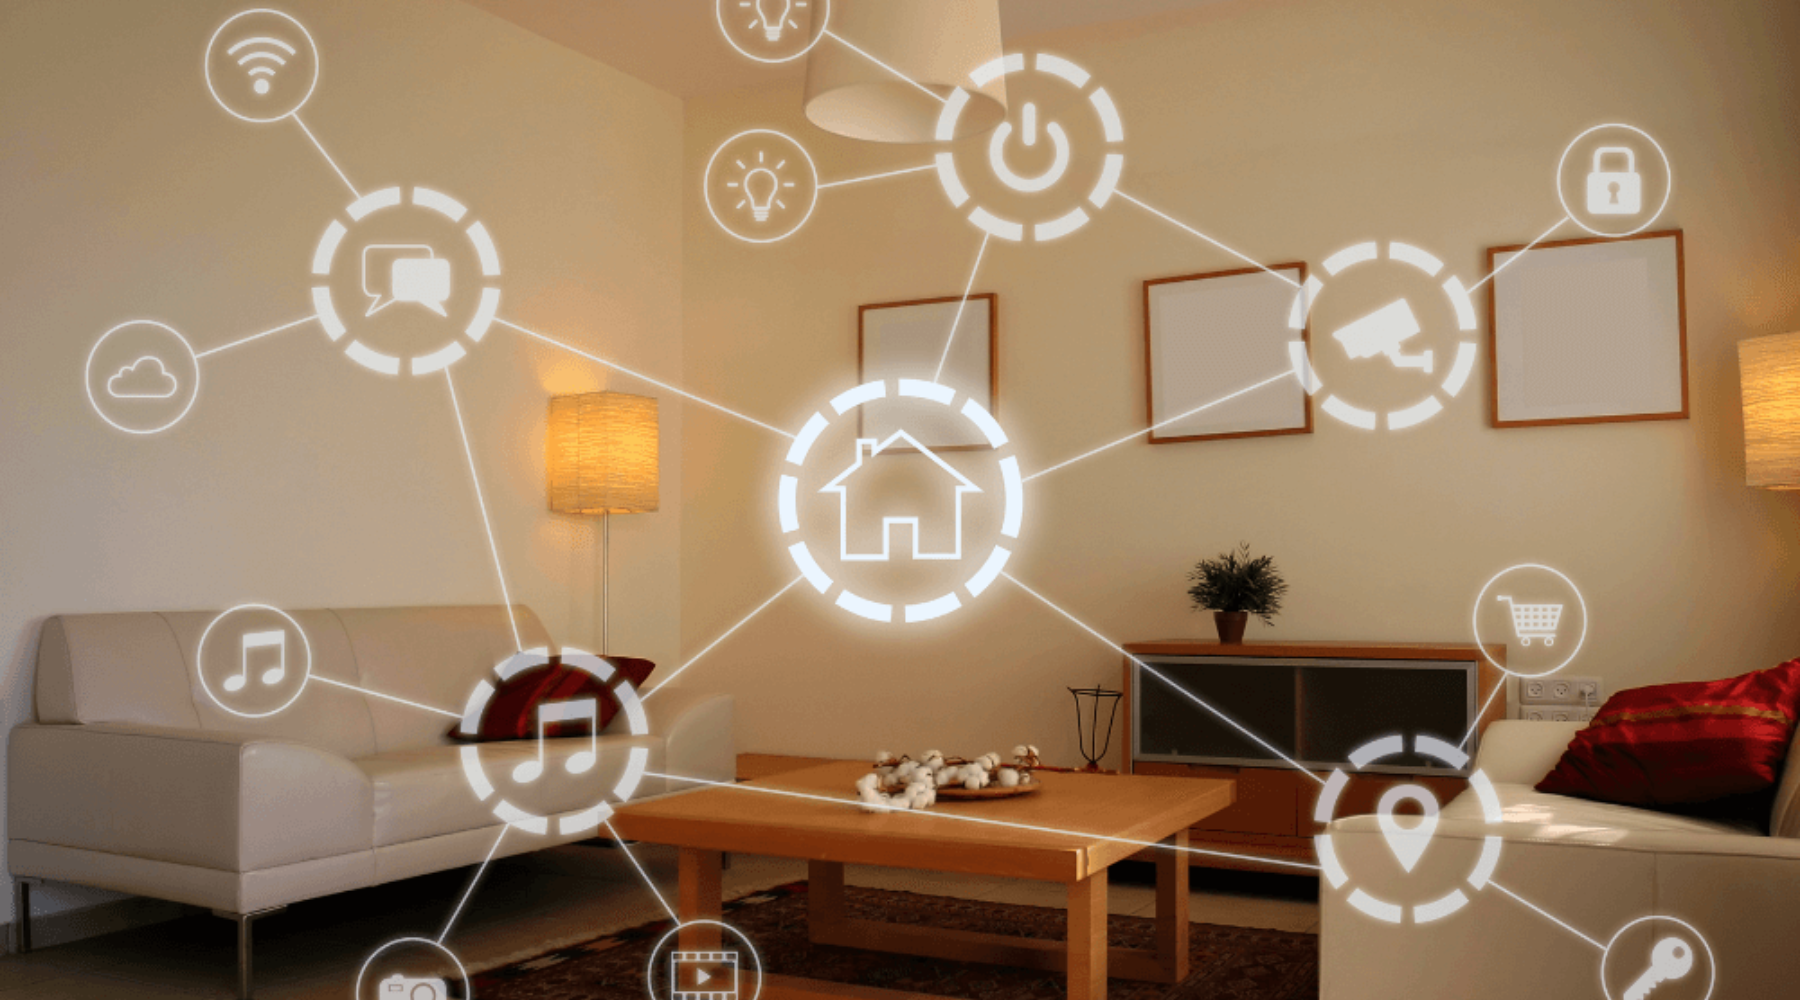 Get Smart in 2023 with these Smart Home Gadgets